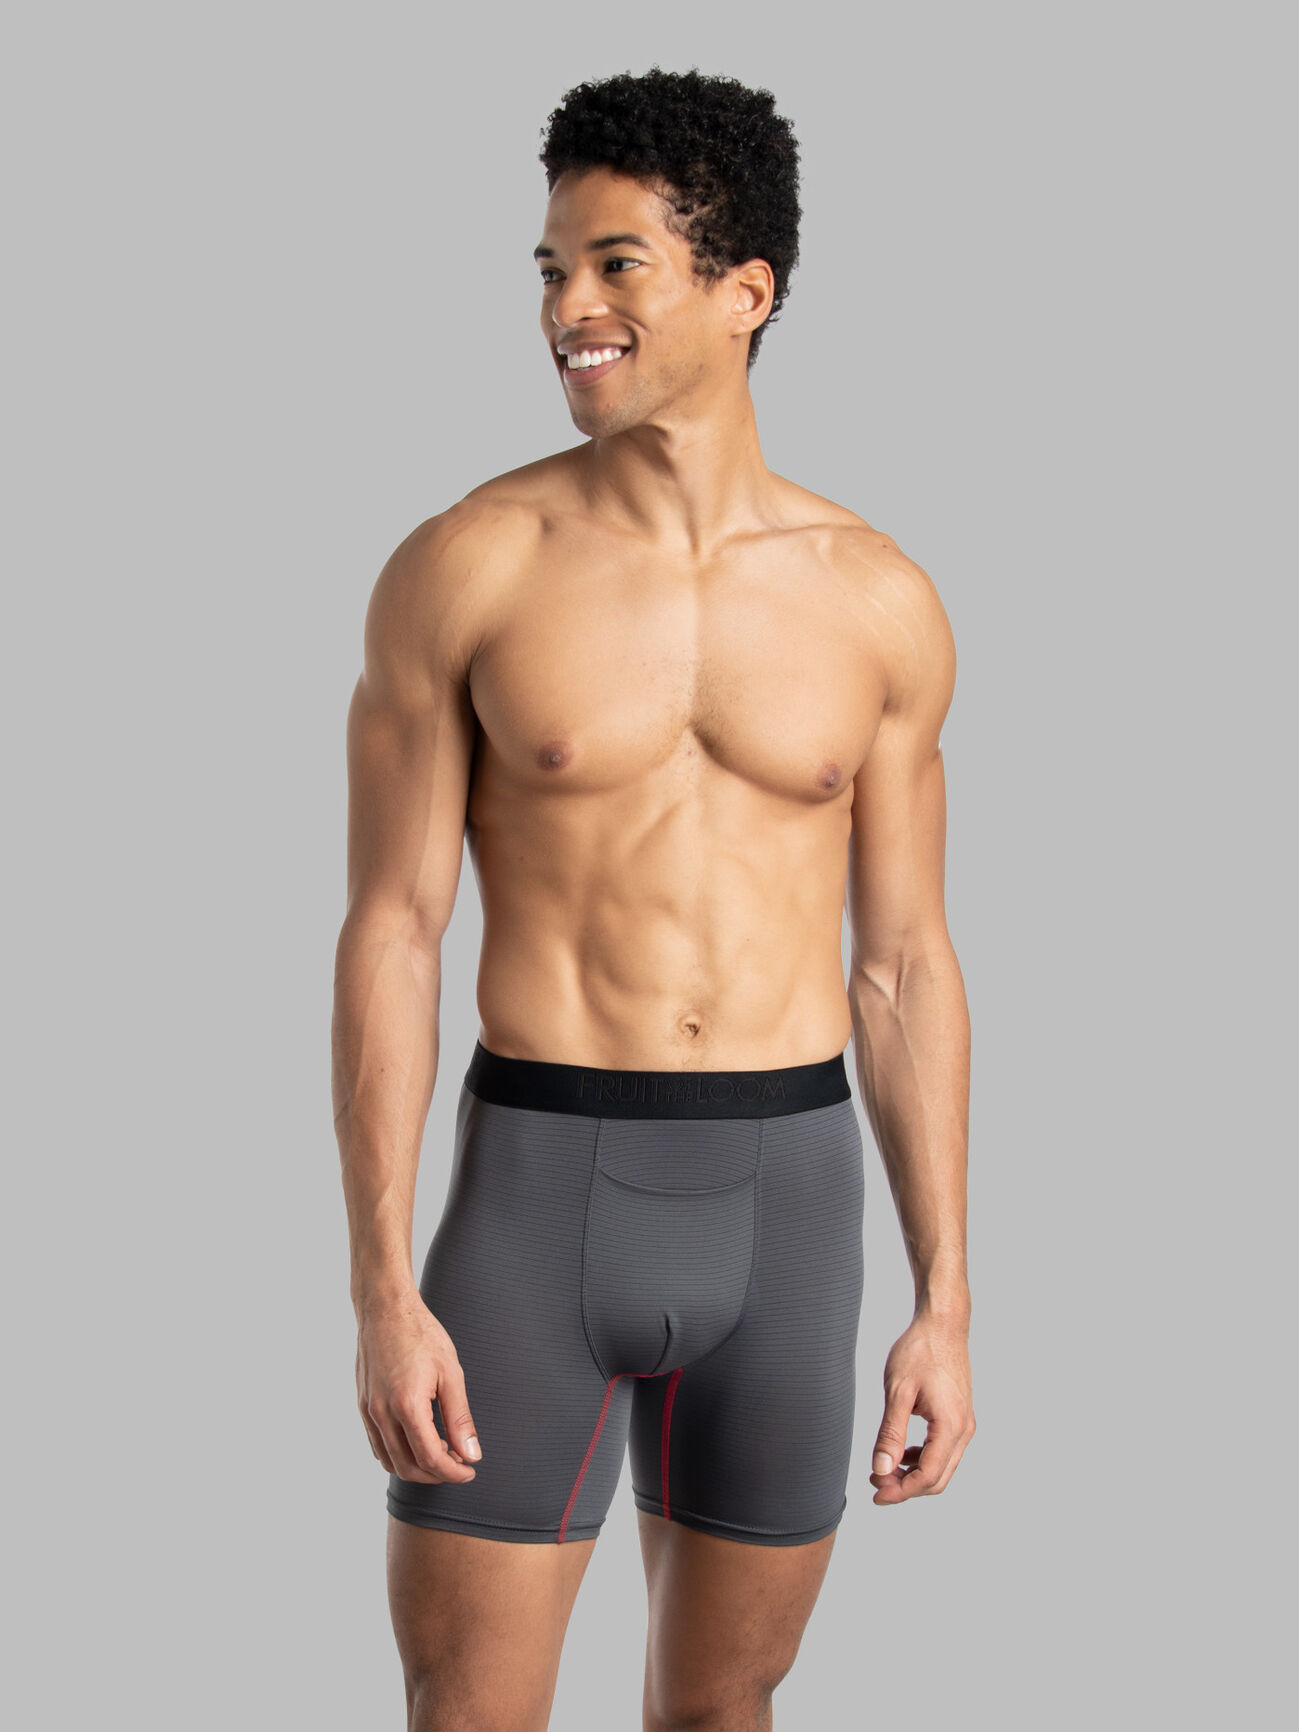 Everyday Boxer Brief 8 (3-Pack) – Tommy John